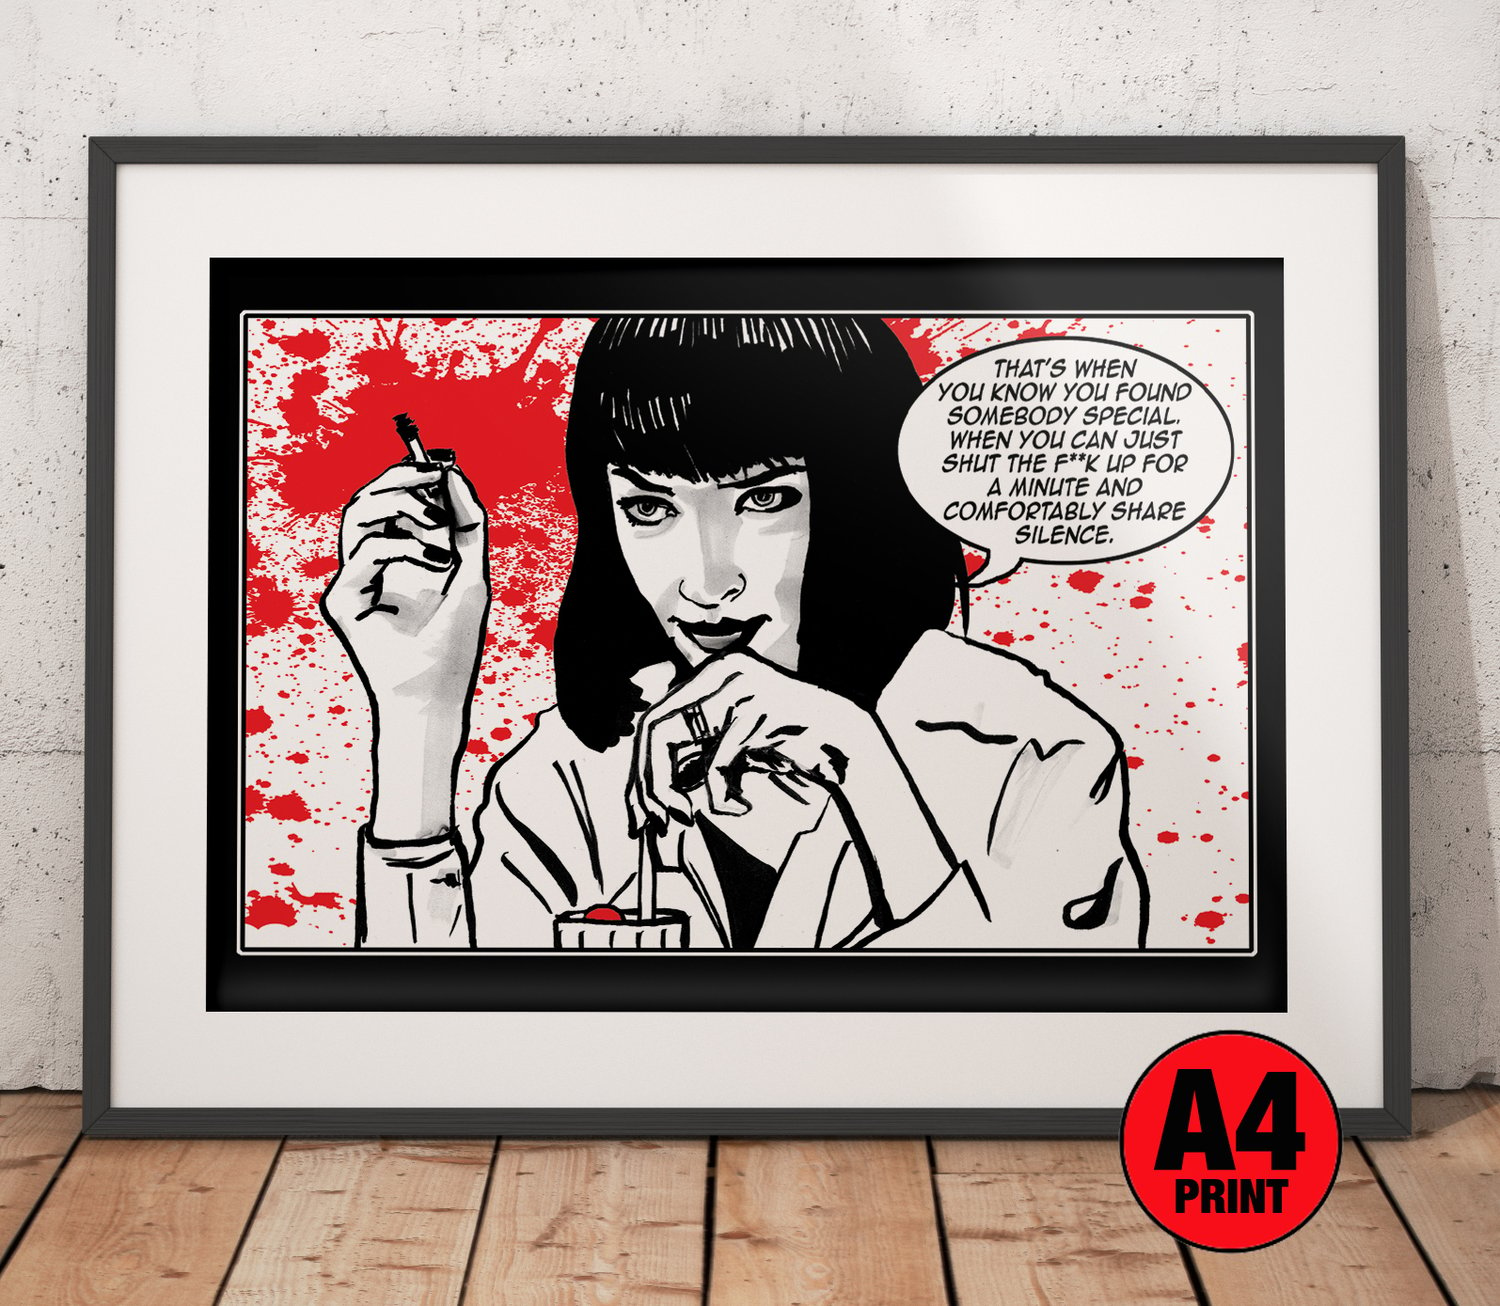 Pulp Fiction 'Comfortable Silence' A4 (12" x 8") Signed Print Comic Style Illustration